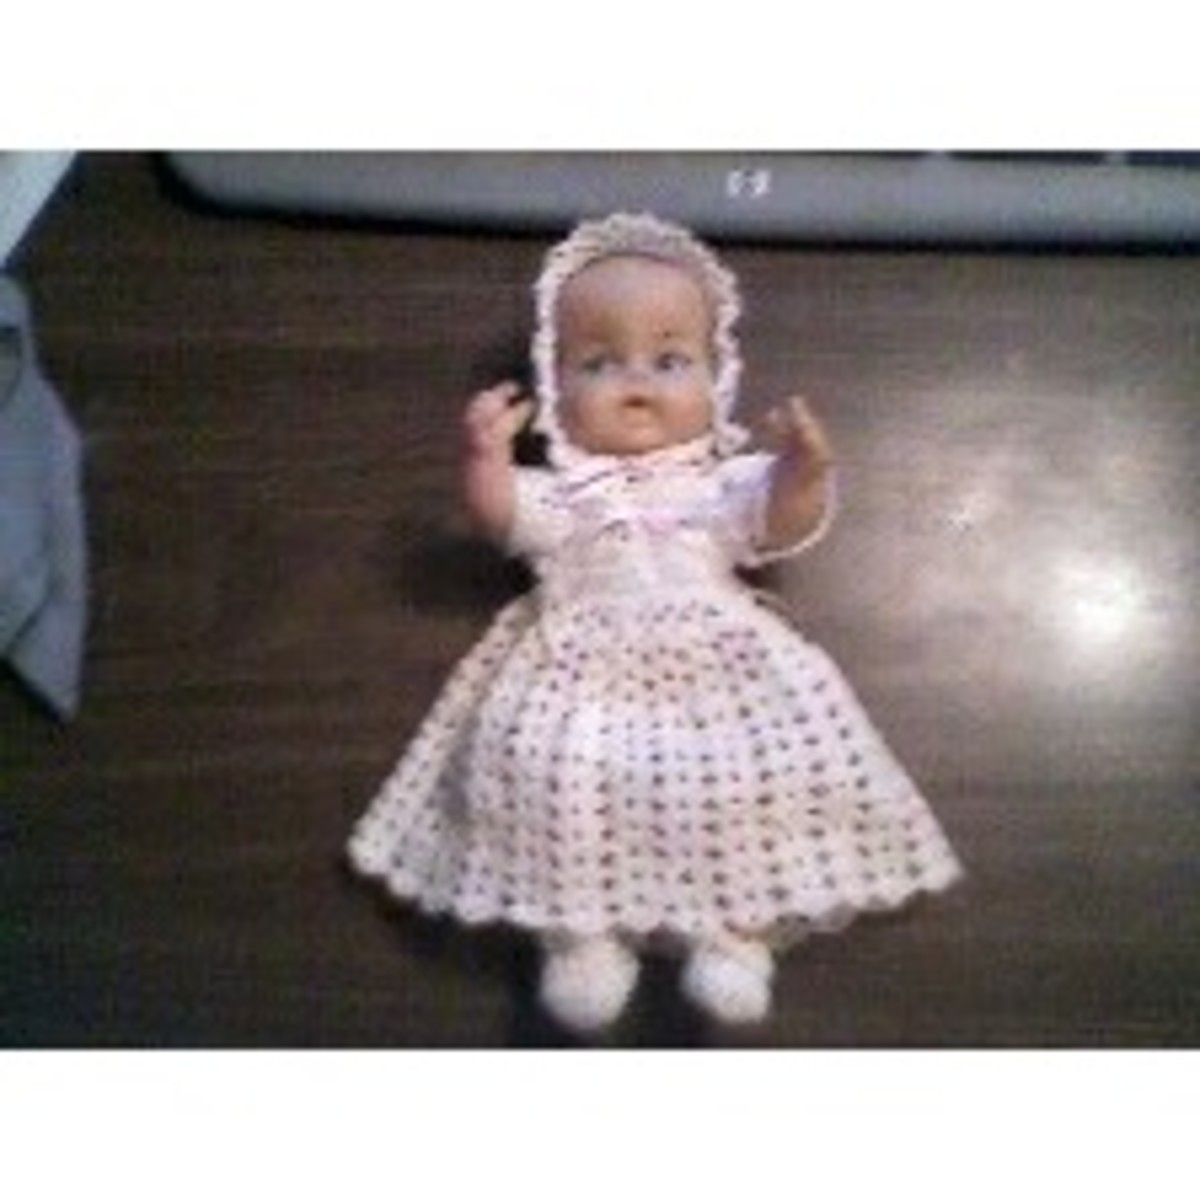 My daughter's first doll from 1973. She looks just like the first doll I had. 